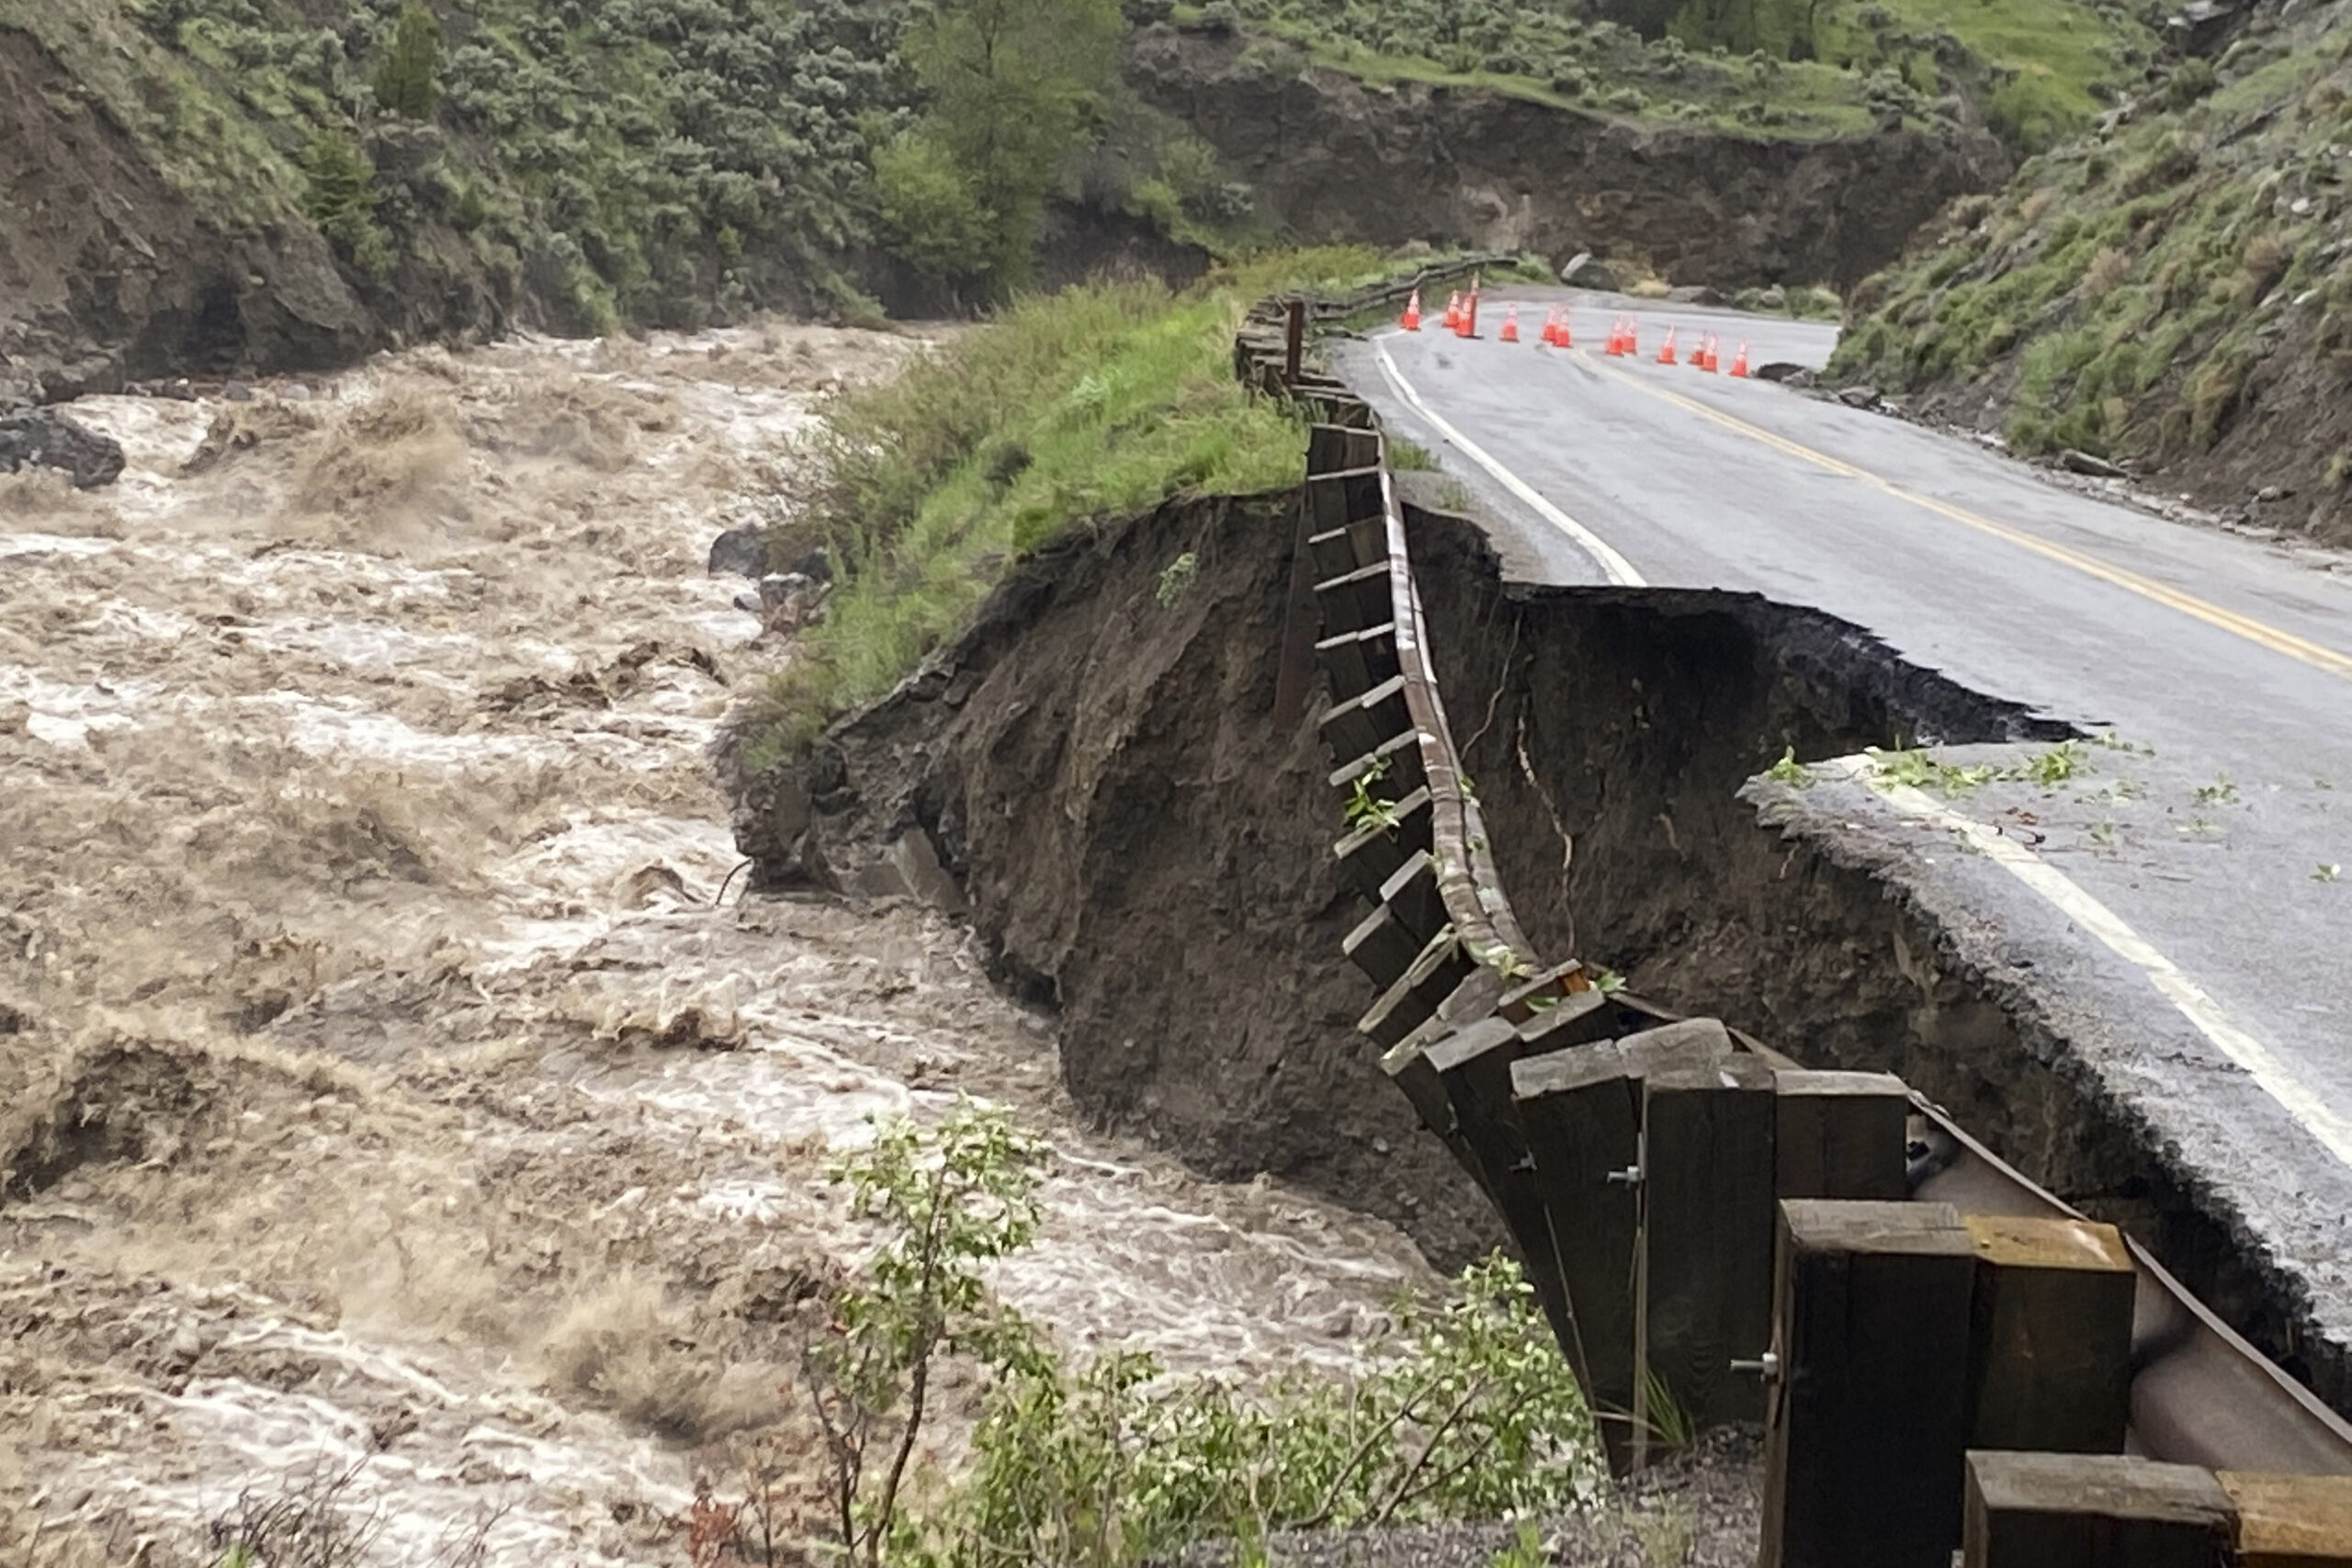 In this photo provided by the National Park Service, is high water in the Gardiner River along the North Entrance to Yellowstone National Park in Montana, that washed out part of a road on Monday, June 13, 2022. (National Park Service via AP)